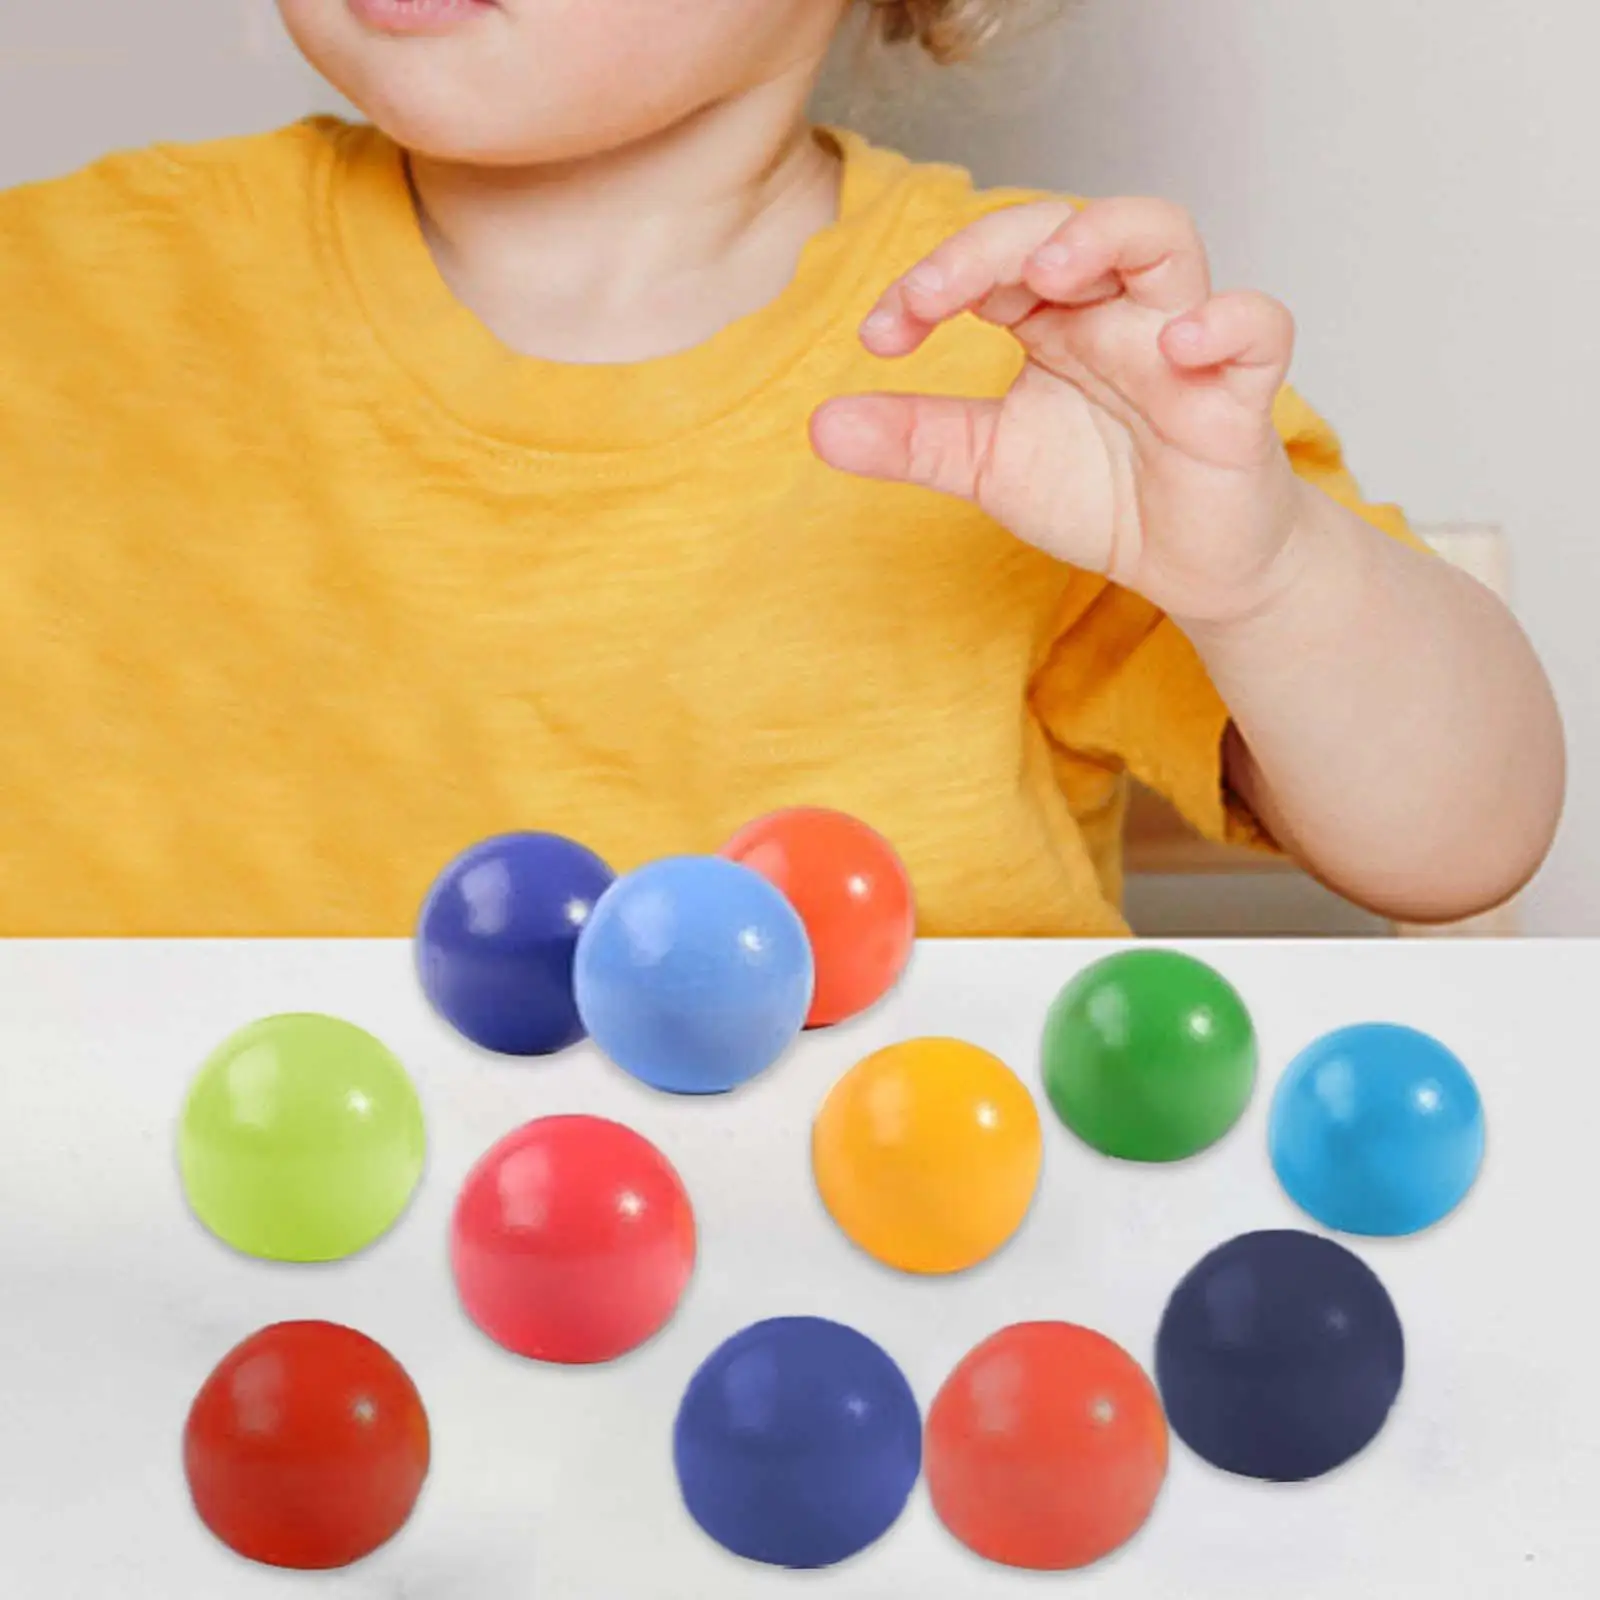 12x Montessori Multicolored Ball Set Birthday Gifts Ball Educational Counting Toy for Girls Age 3 4 5 6 Children